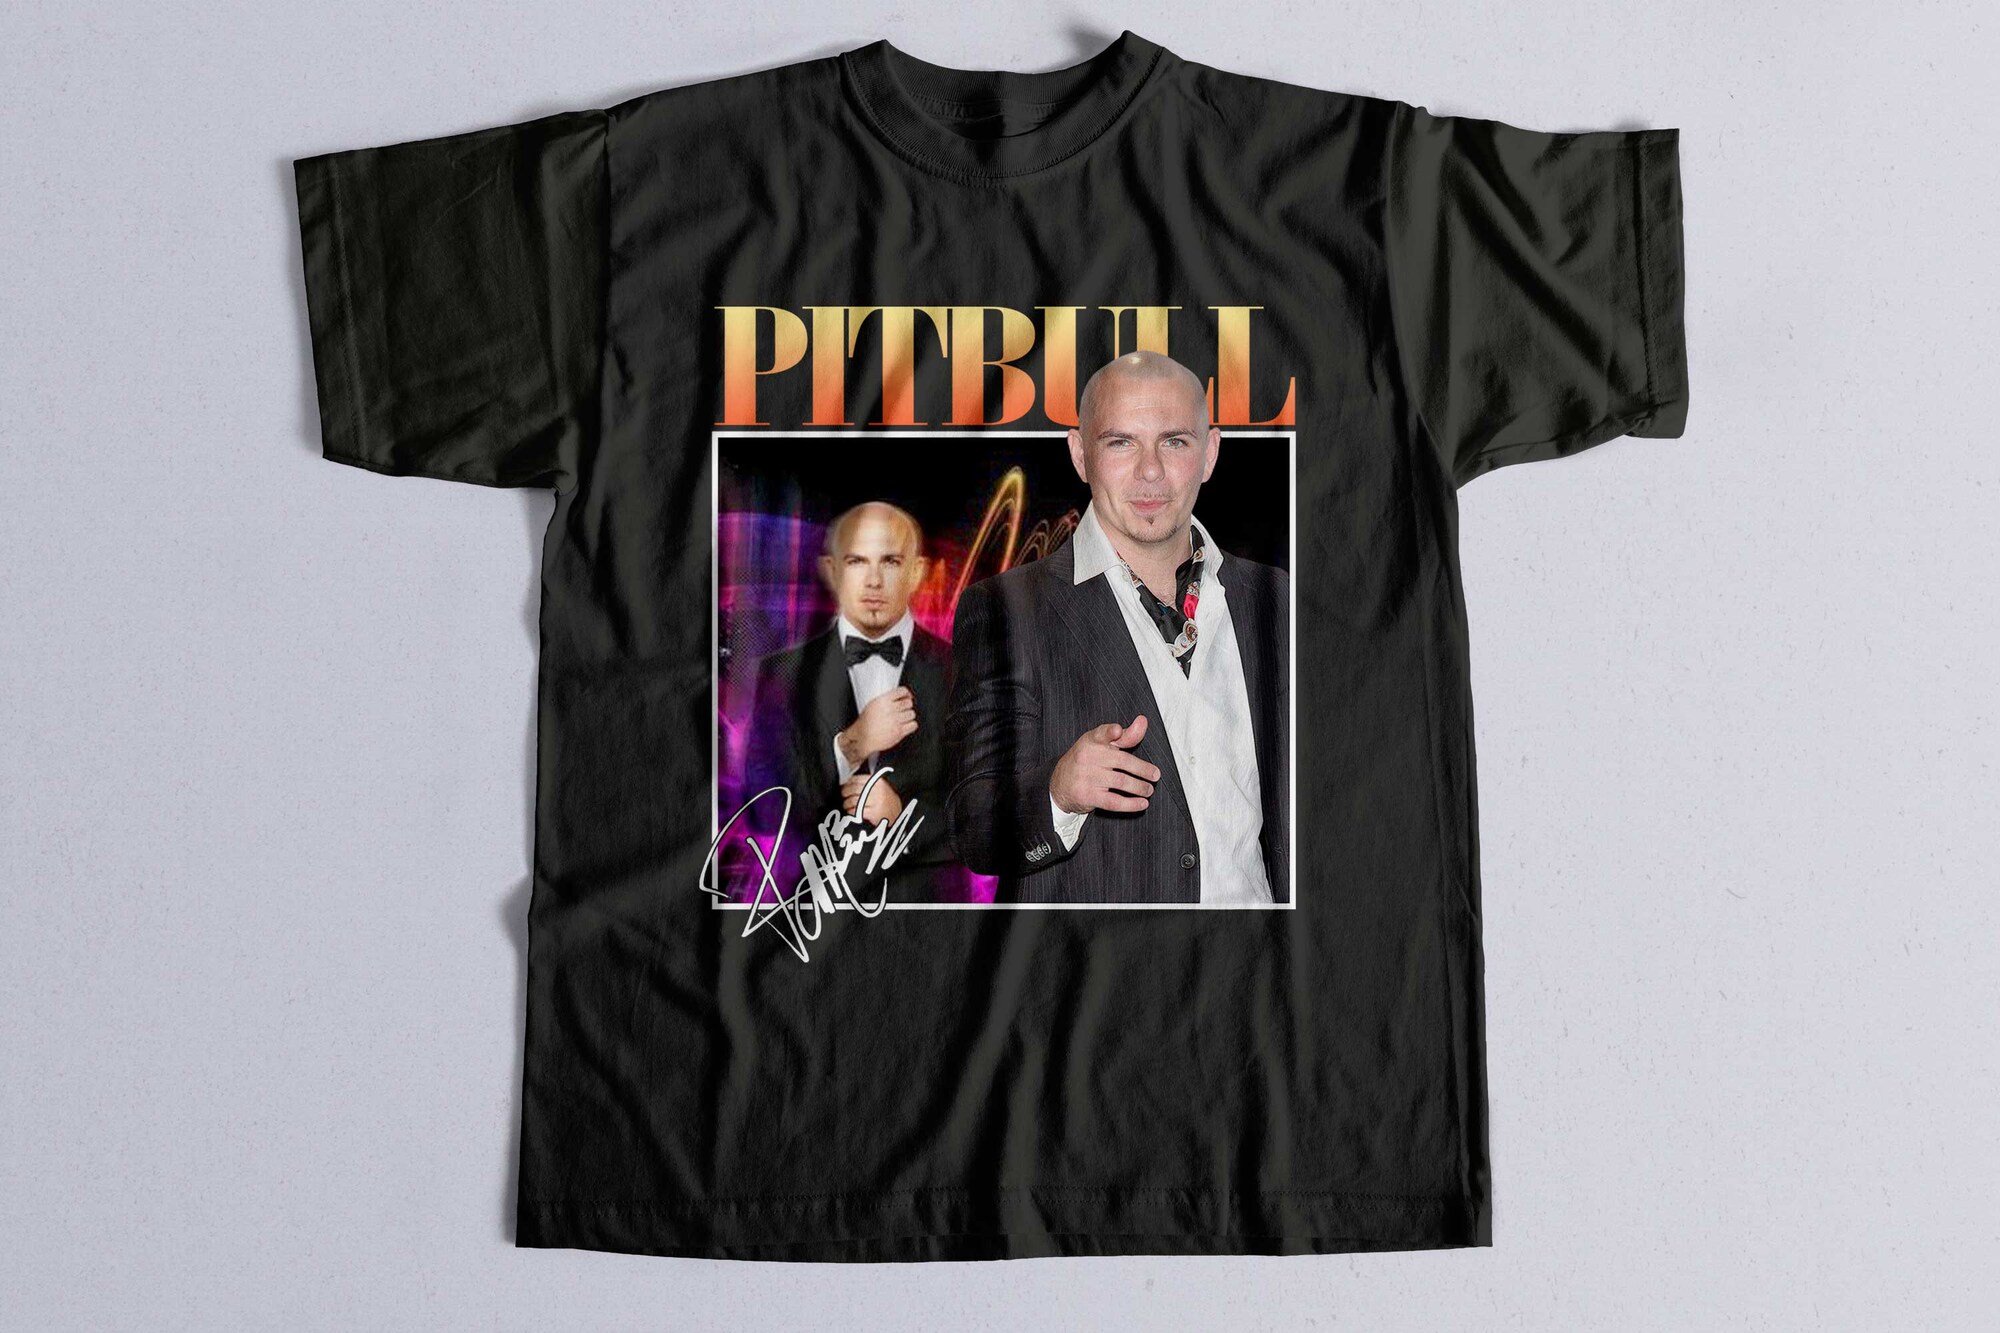 Discover Vintage Pitbull Shirt, Pitbull Mr World Wide Shirt, Can't stop us now Shirt